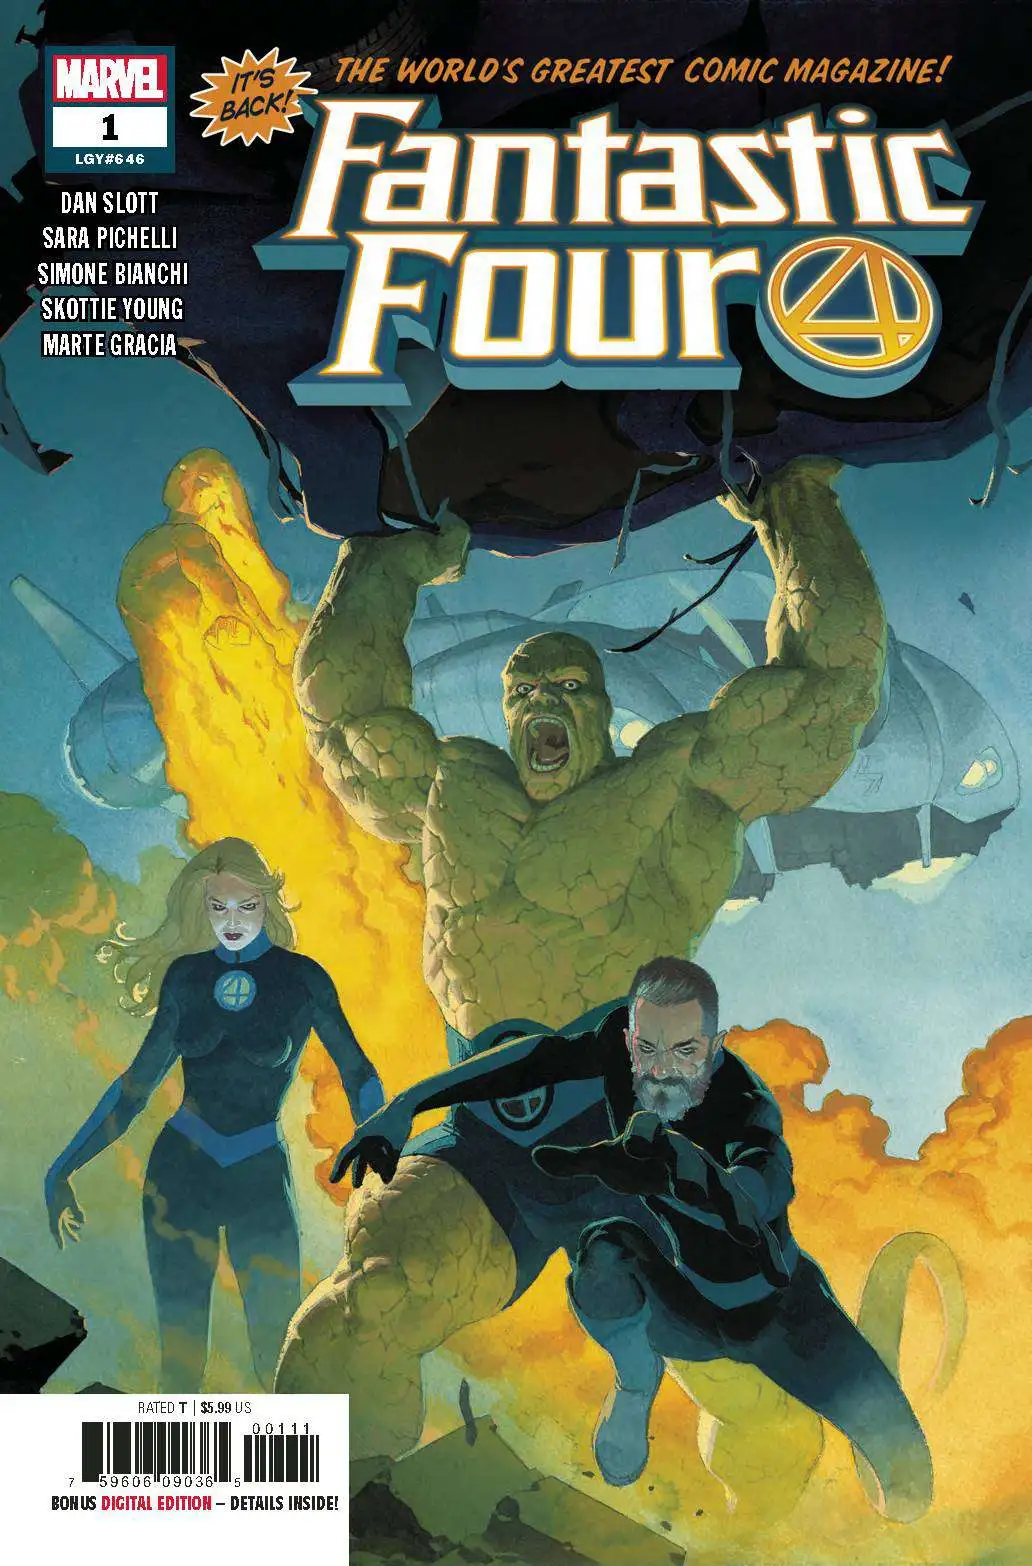 2018 FREE SHIPPING! FANTASTIC FOUR #1 ARTGERM VARIANT COVER Set of 4 